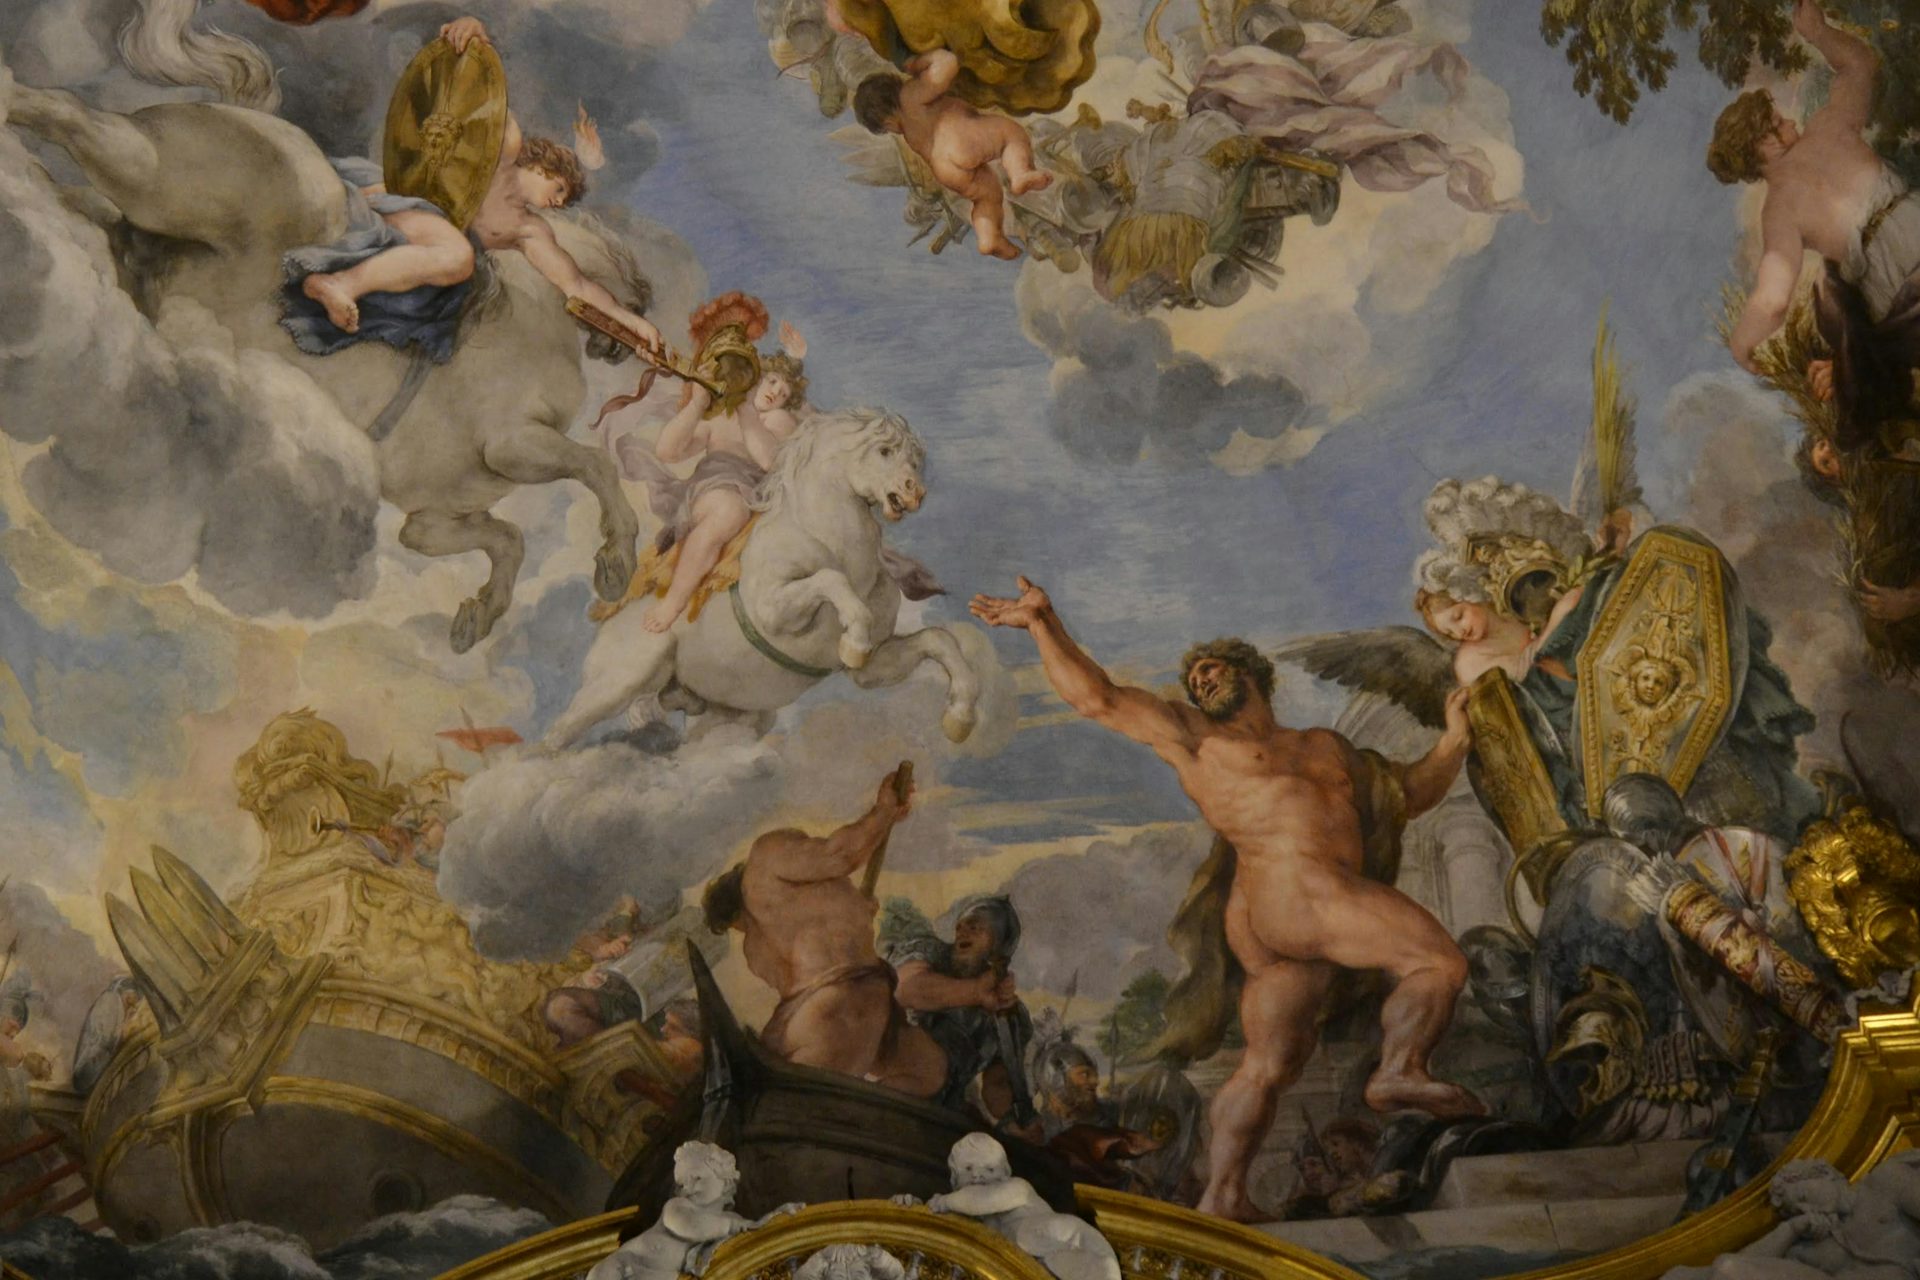 The Dioscuri Appear in the Sky on White Horses and Offer a Sword and Helmet to the Prince by Pietro da Cortona